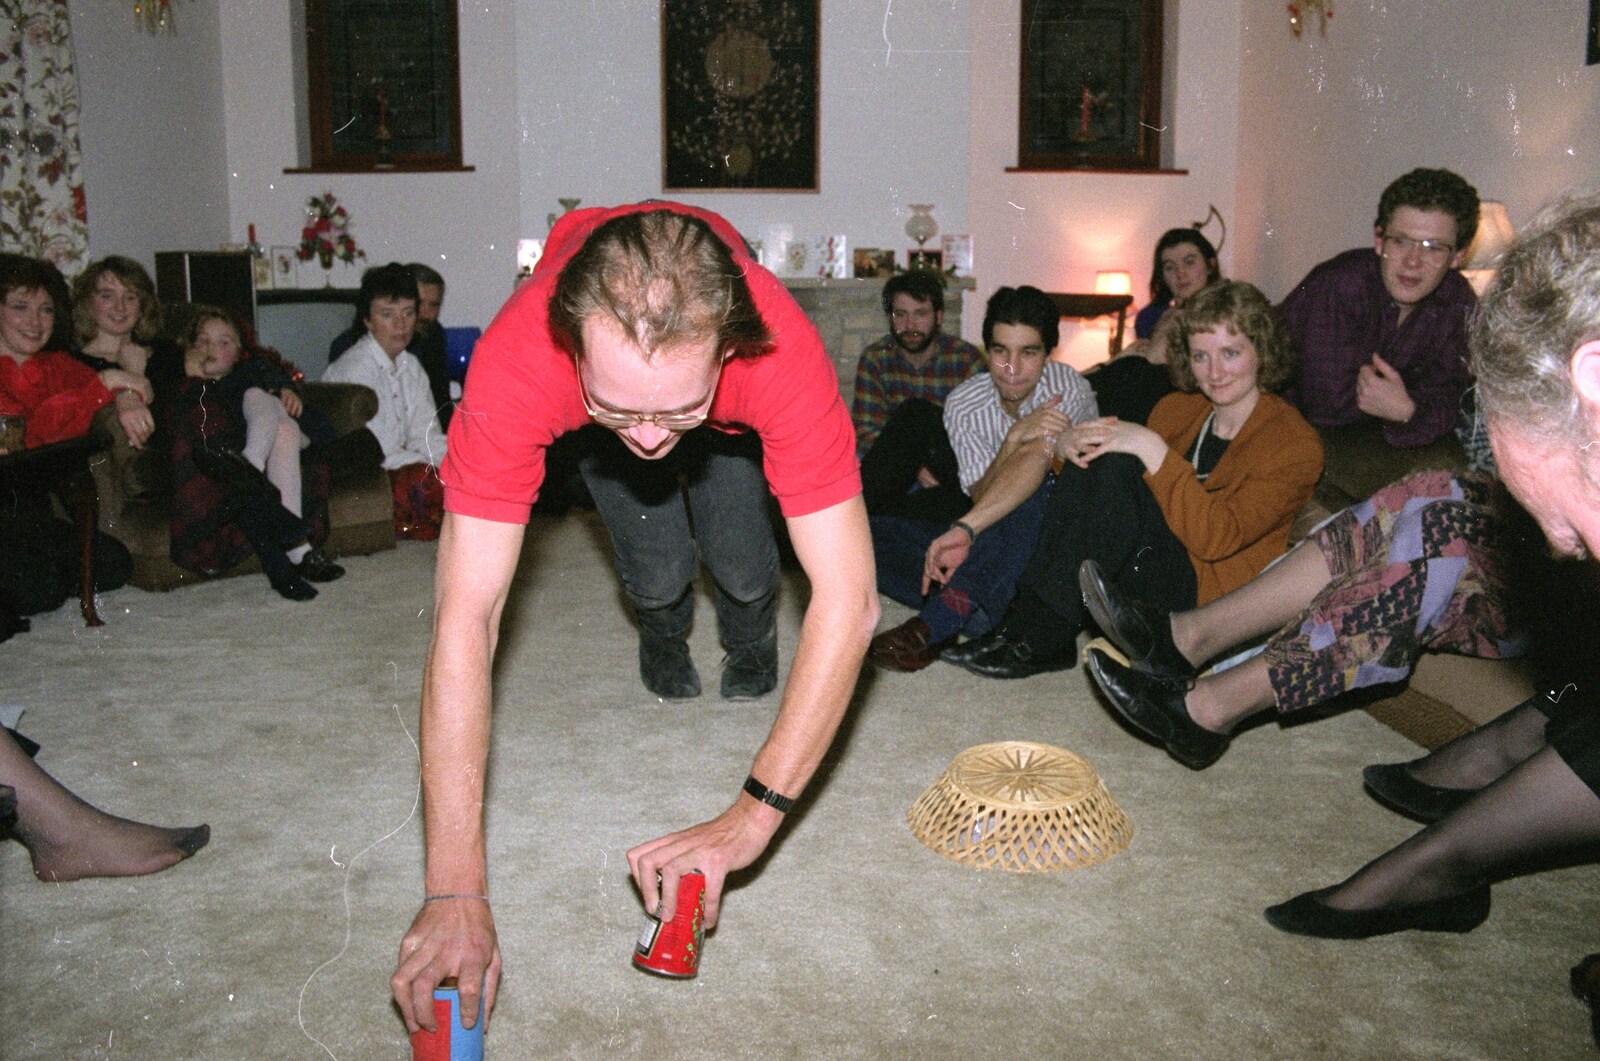 Phil does a thing involving walking on cans from New Year's Eve at Phil's, Hordle, Hampshire - 31st December 1990